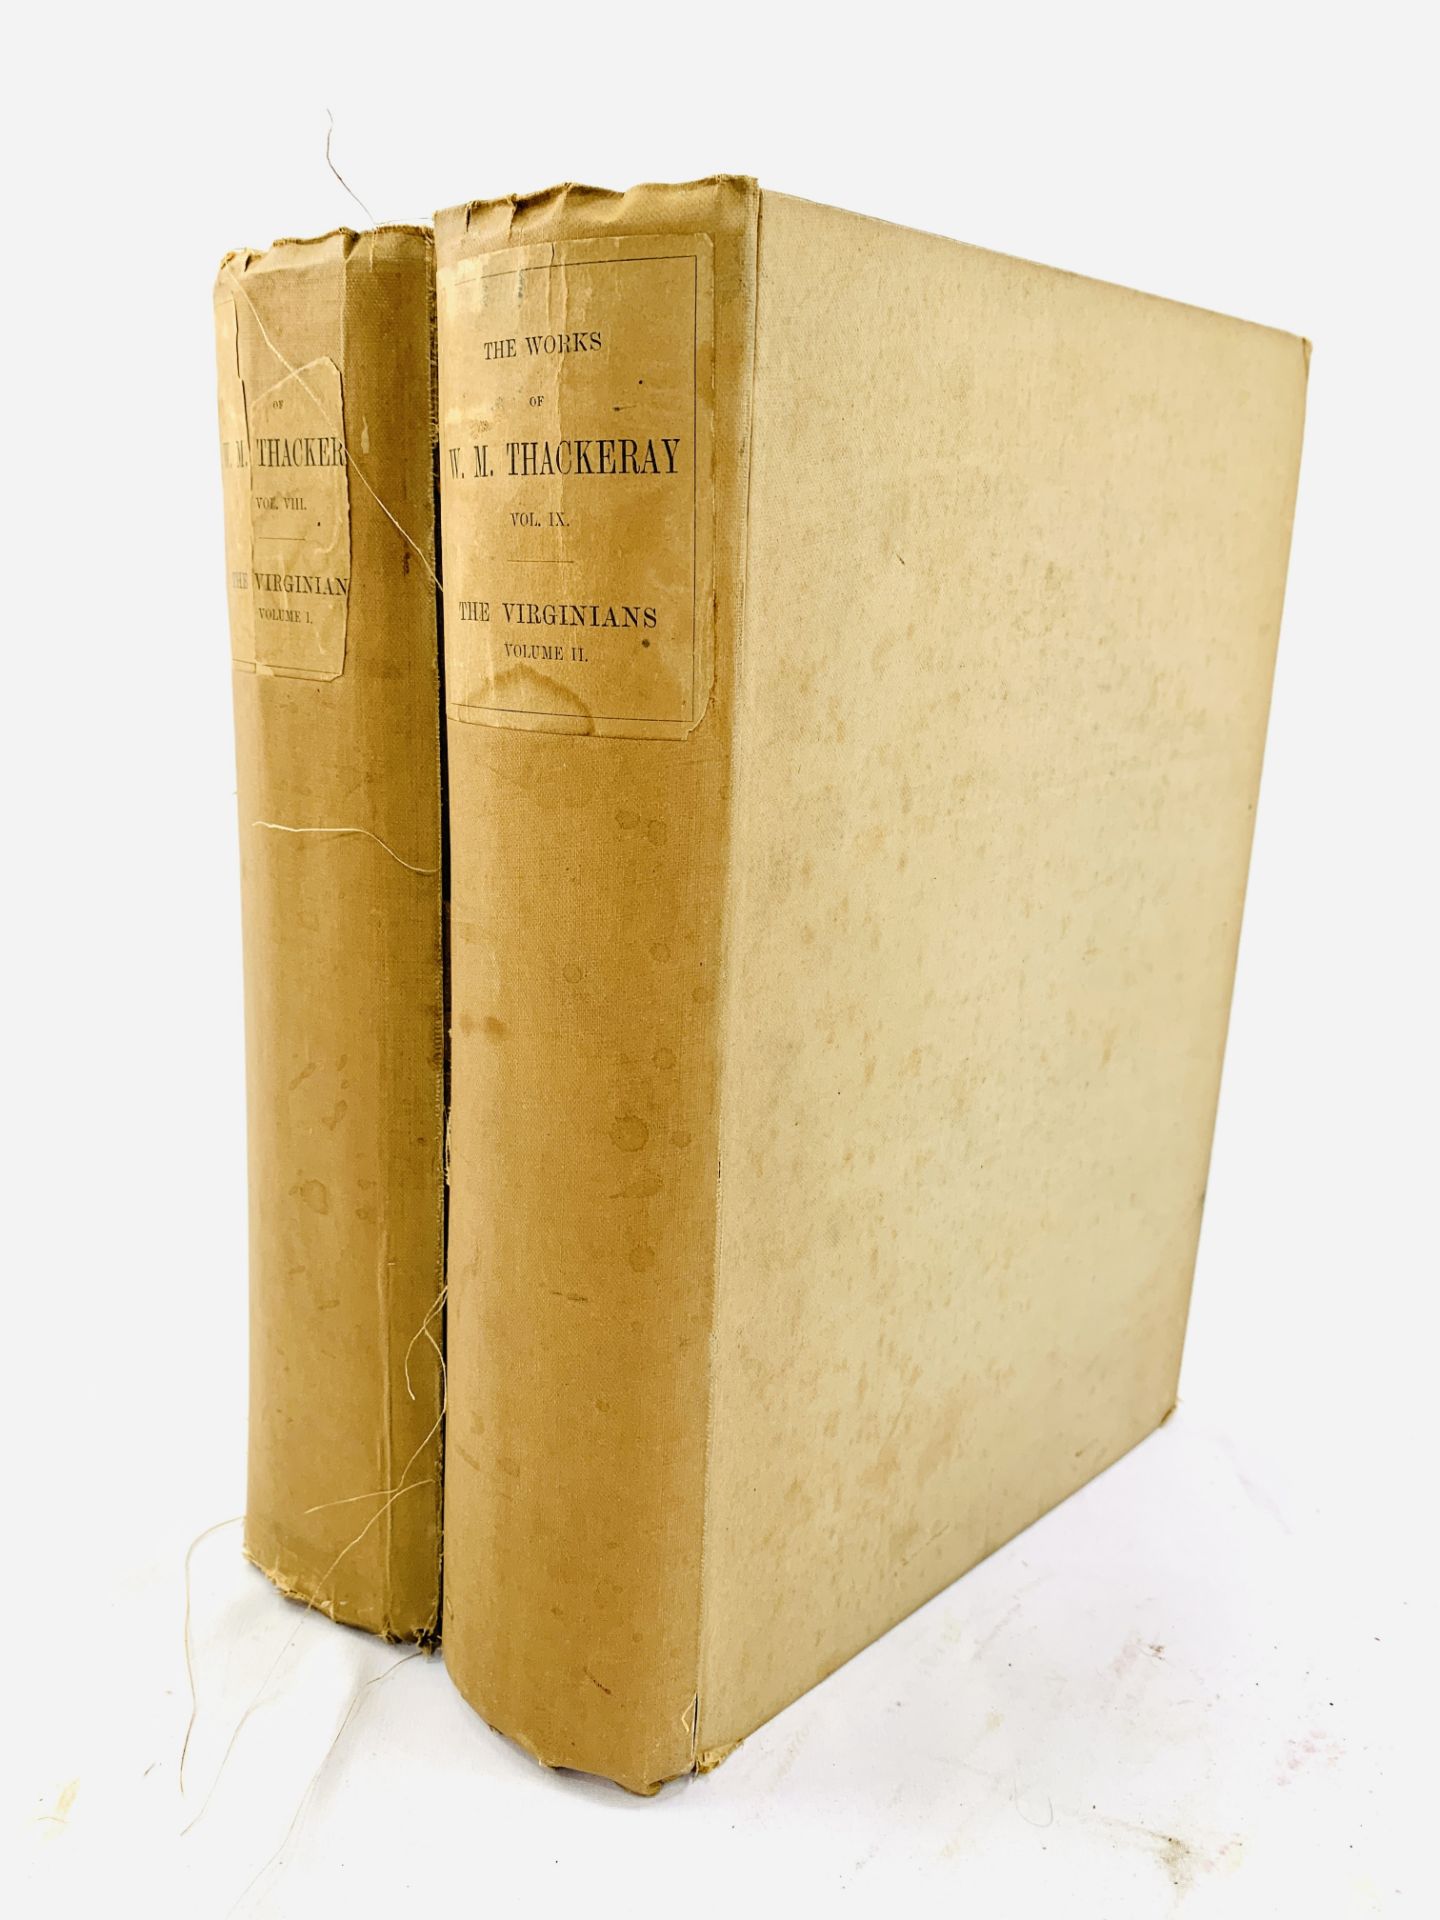 The Works of W. M. Thackeray: 'The Virginians', volumes 1 and 2, limited edition, published 1879